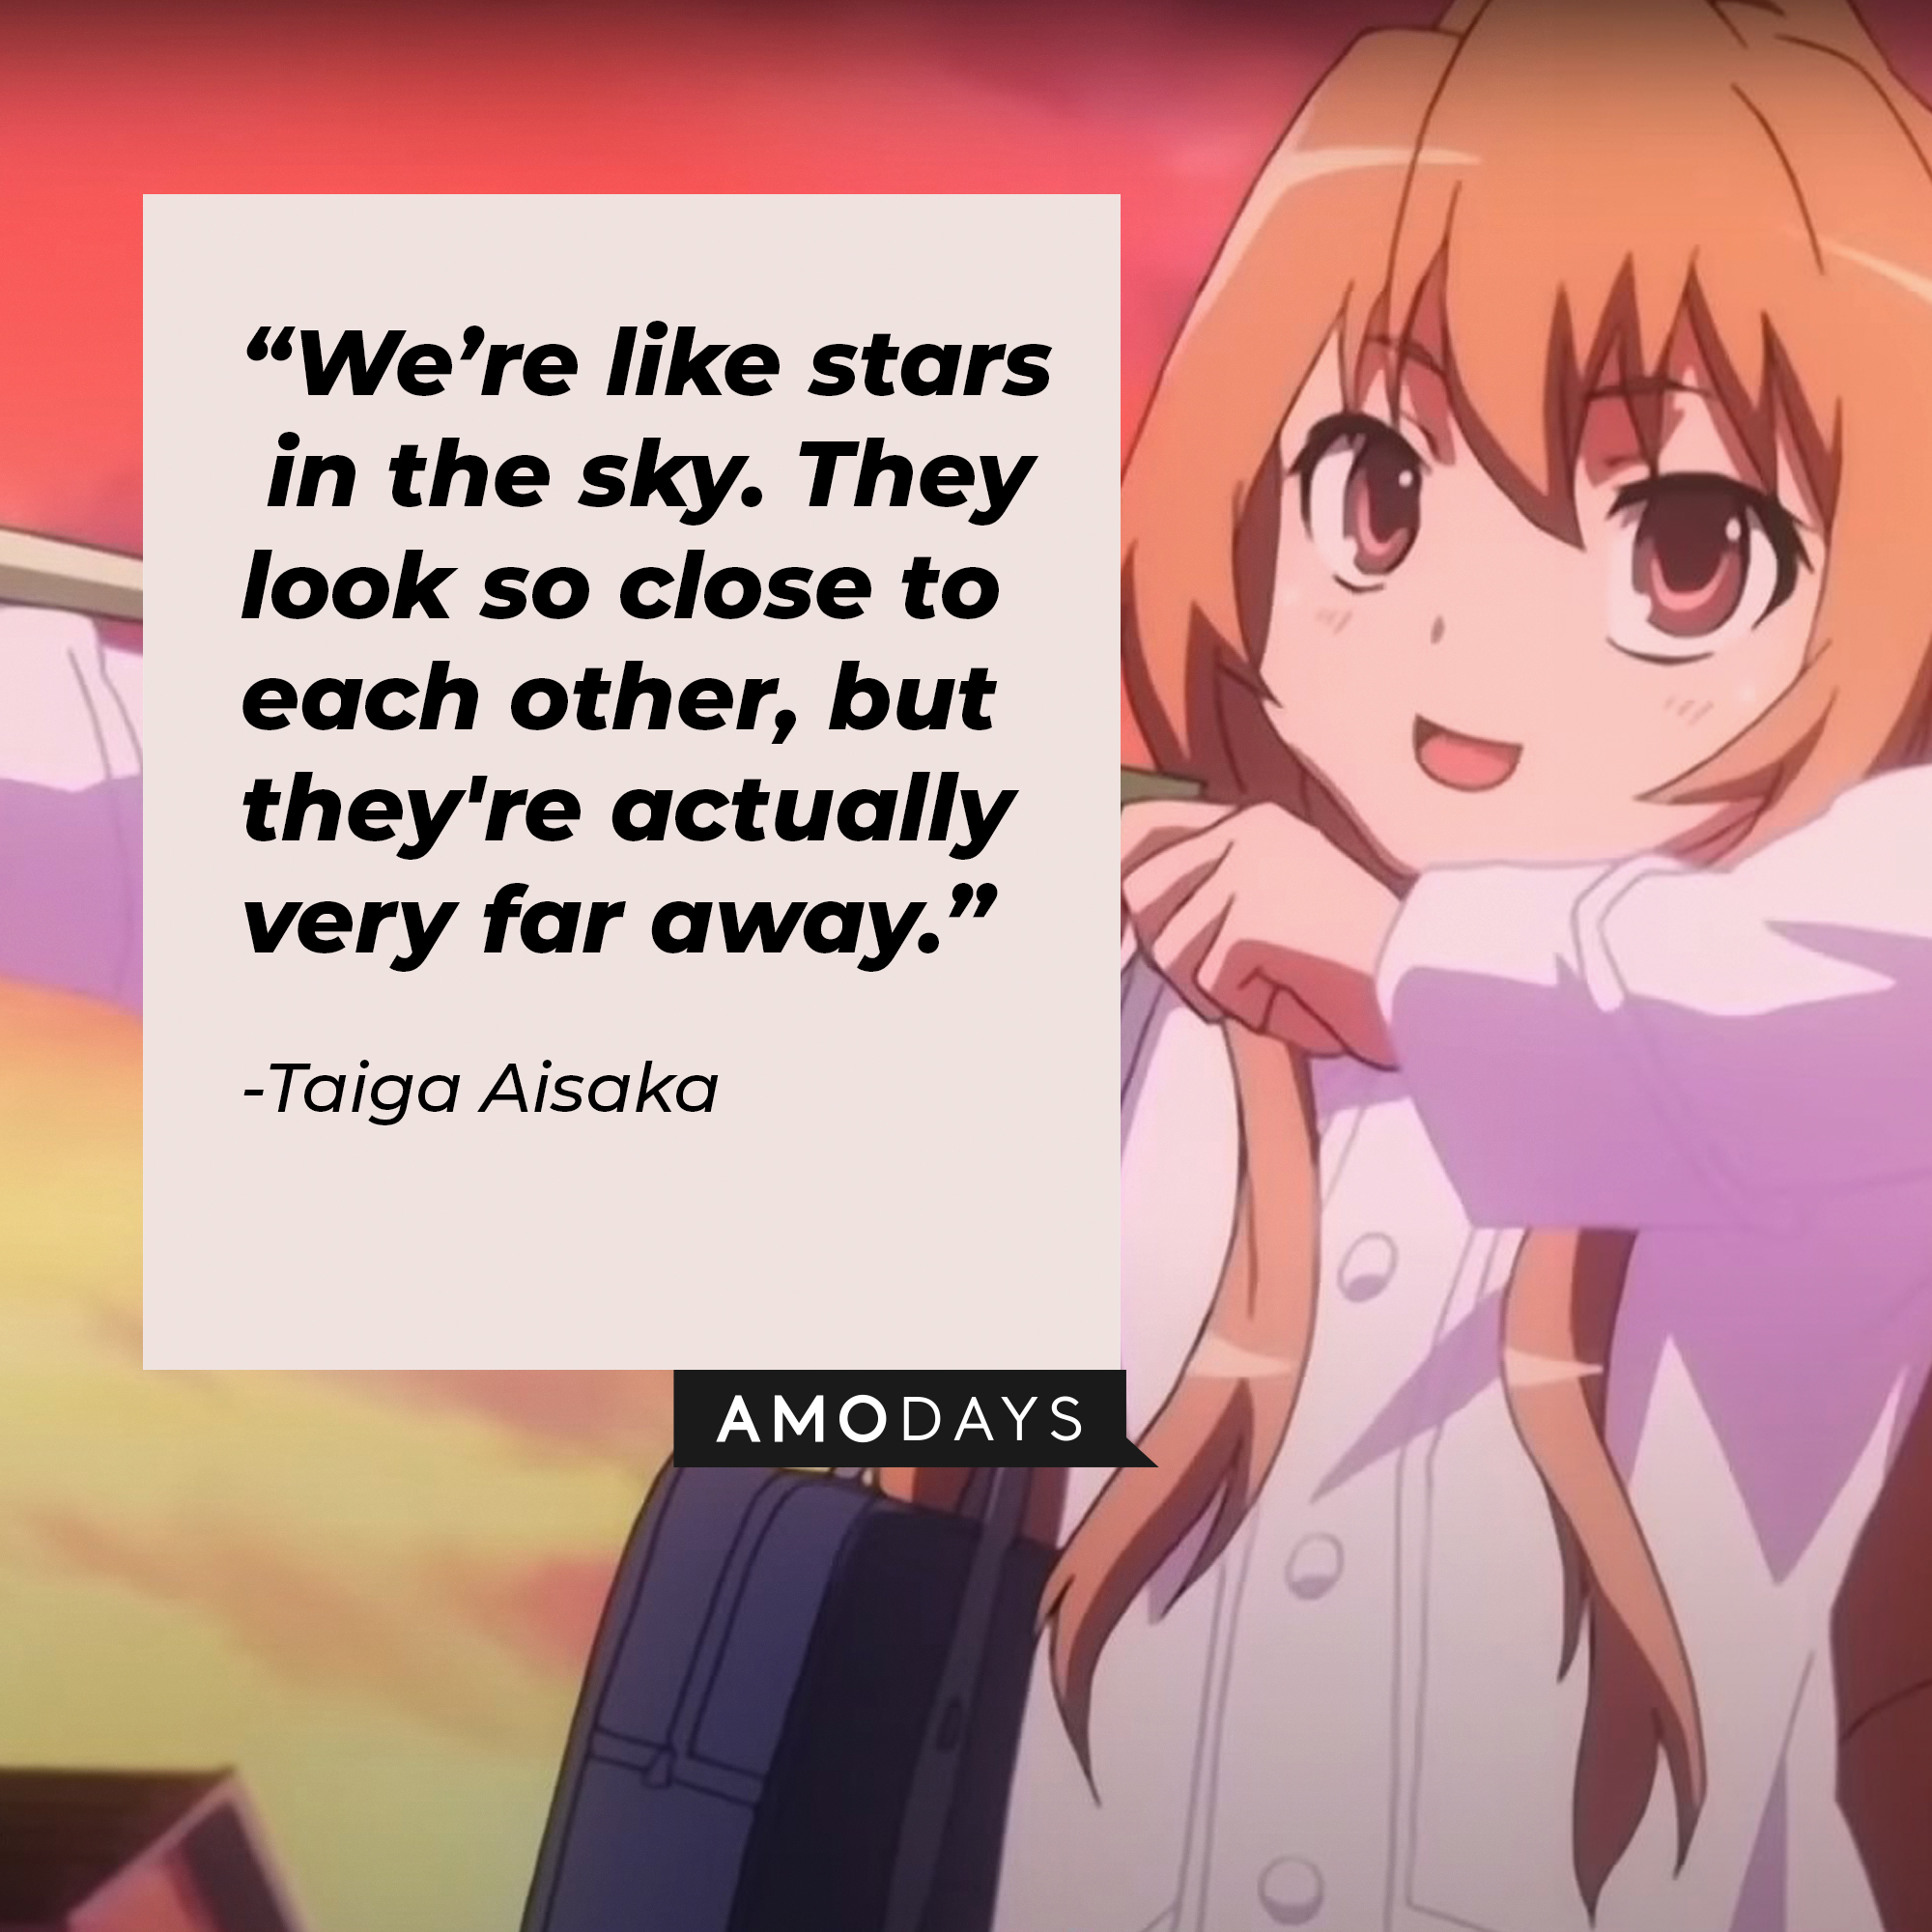 A picture of the animated character Taiga Aisaka with a quote by her: “We’re like stars in the sky. They look so close to each other, but they're actually very far away.” | Image: facebook.com/toradoraoff